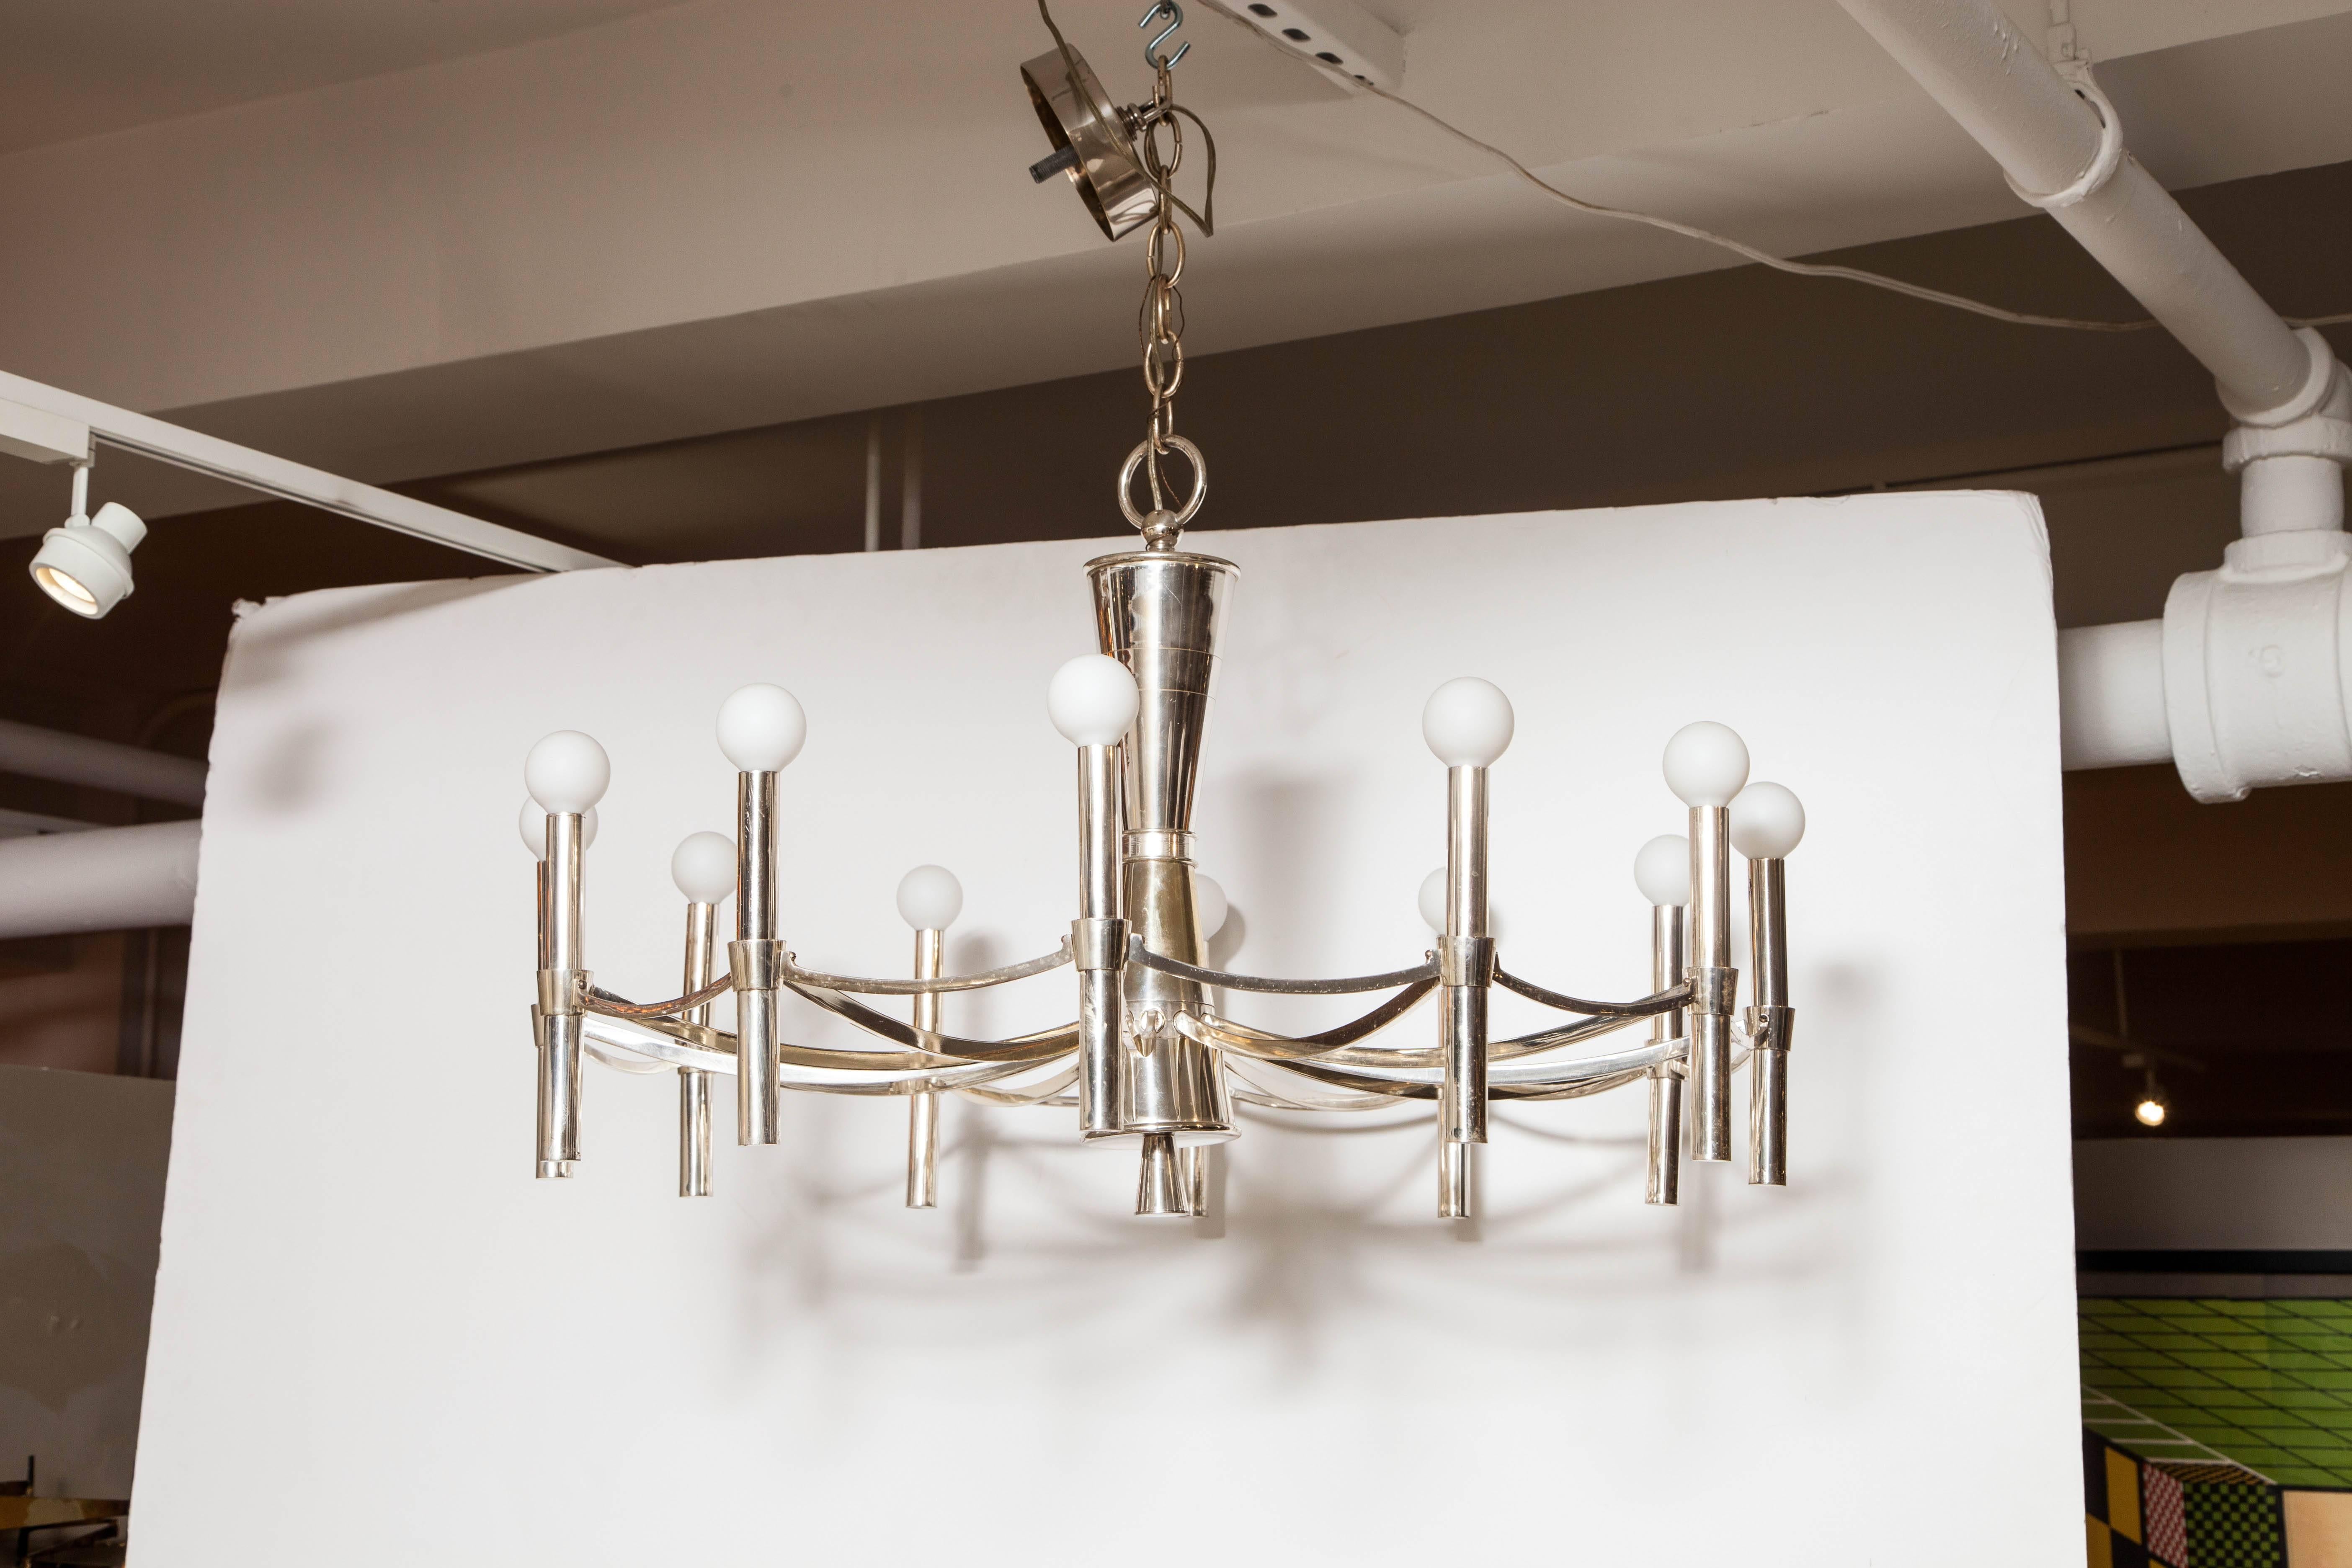 Mid-20th Century Italian Silver Plated Twelve-Light Chandelier For Sale